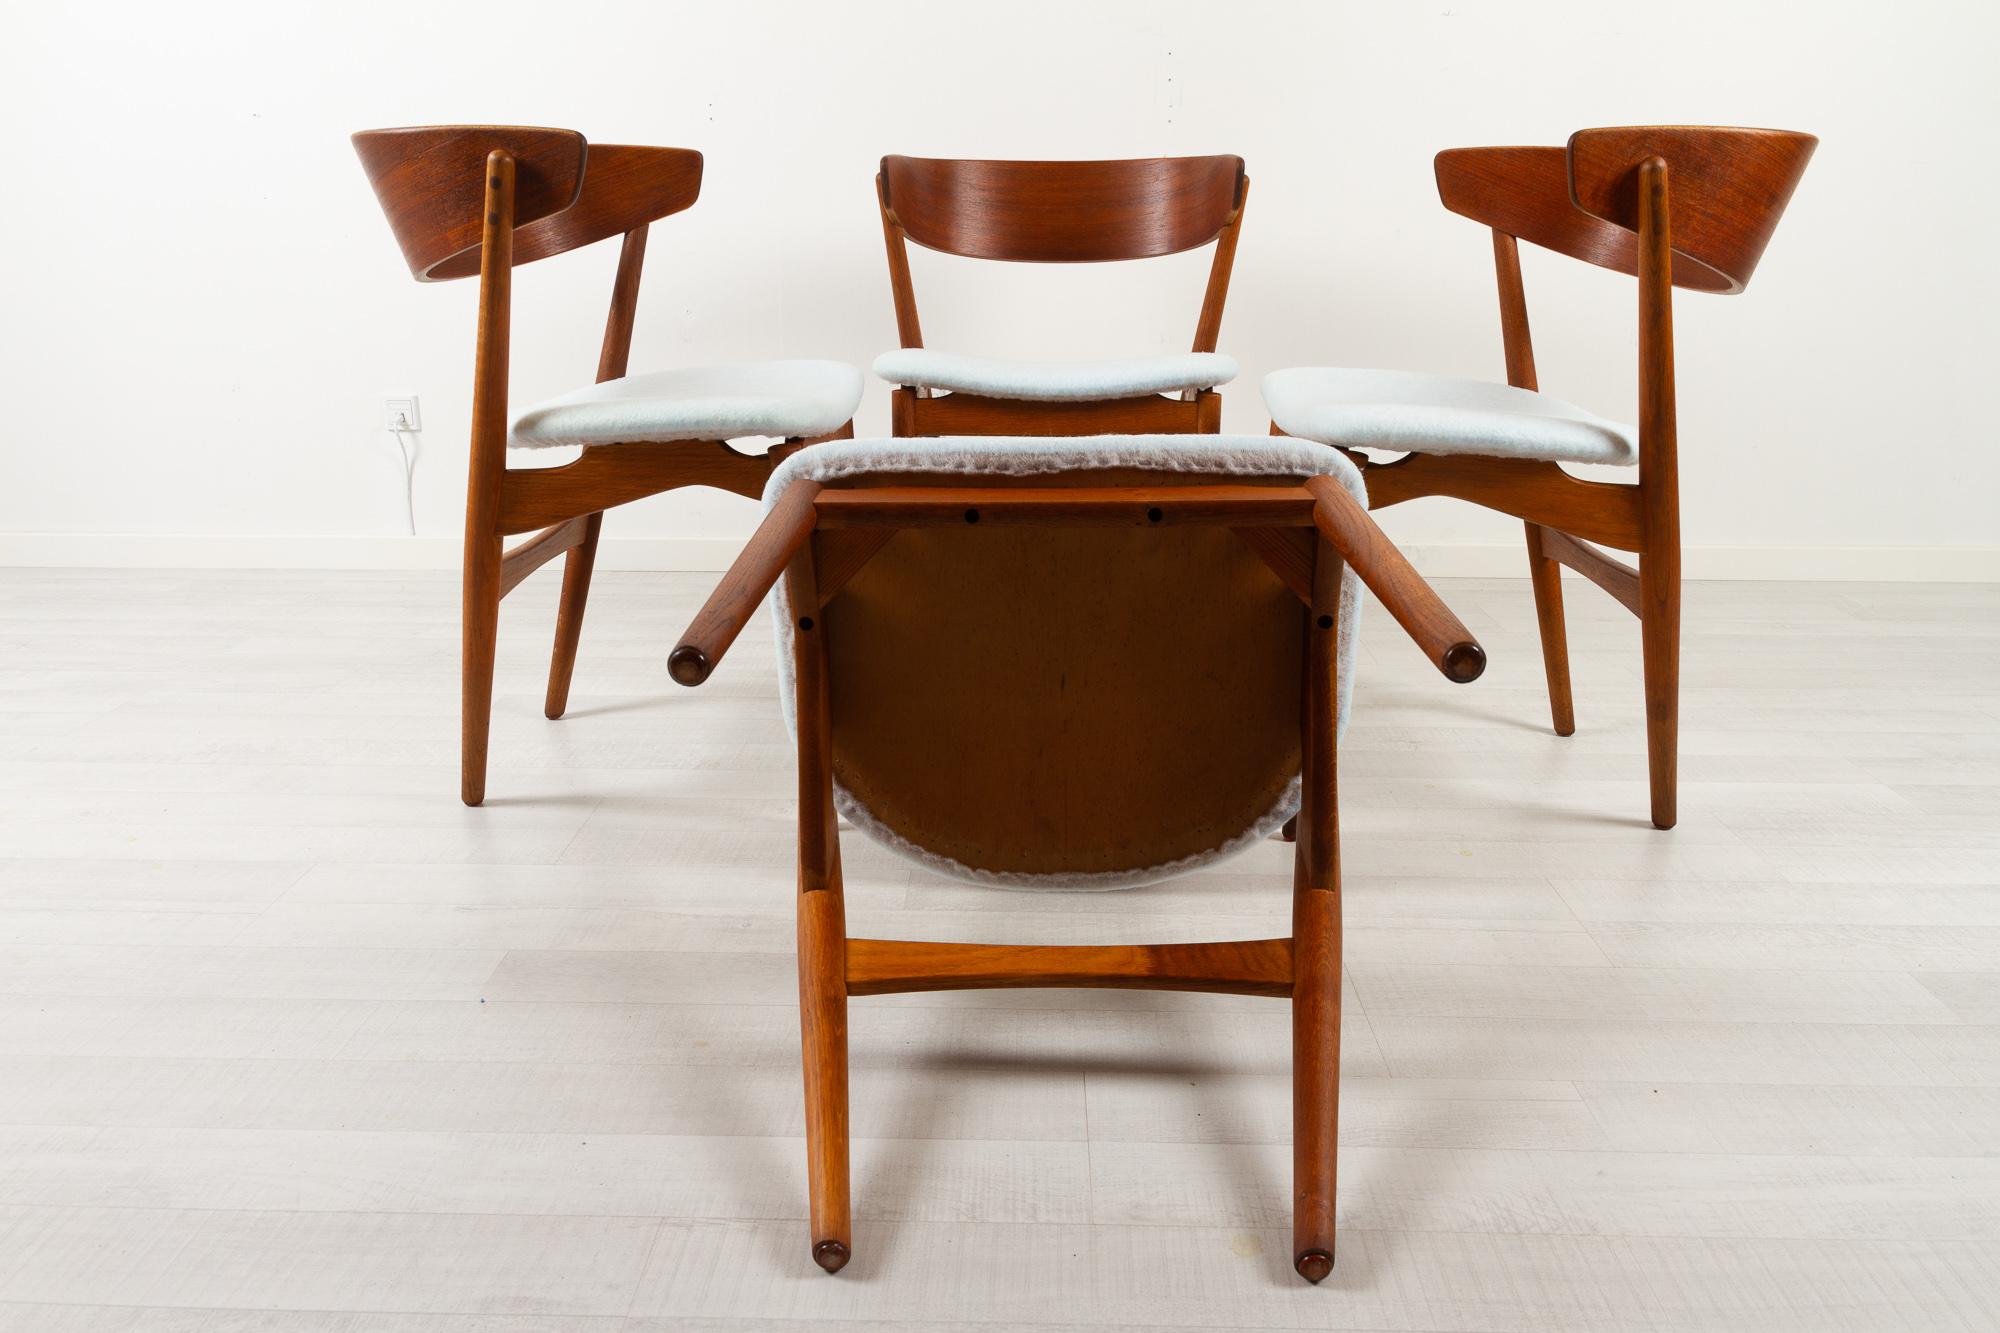 Vintage Danish Teak Dining Chairs No. 7 by Helge Sibast 1960s Set of 4 For Sale 4